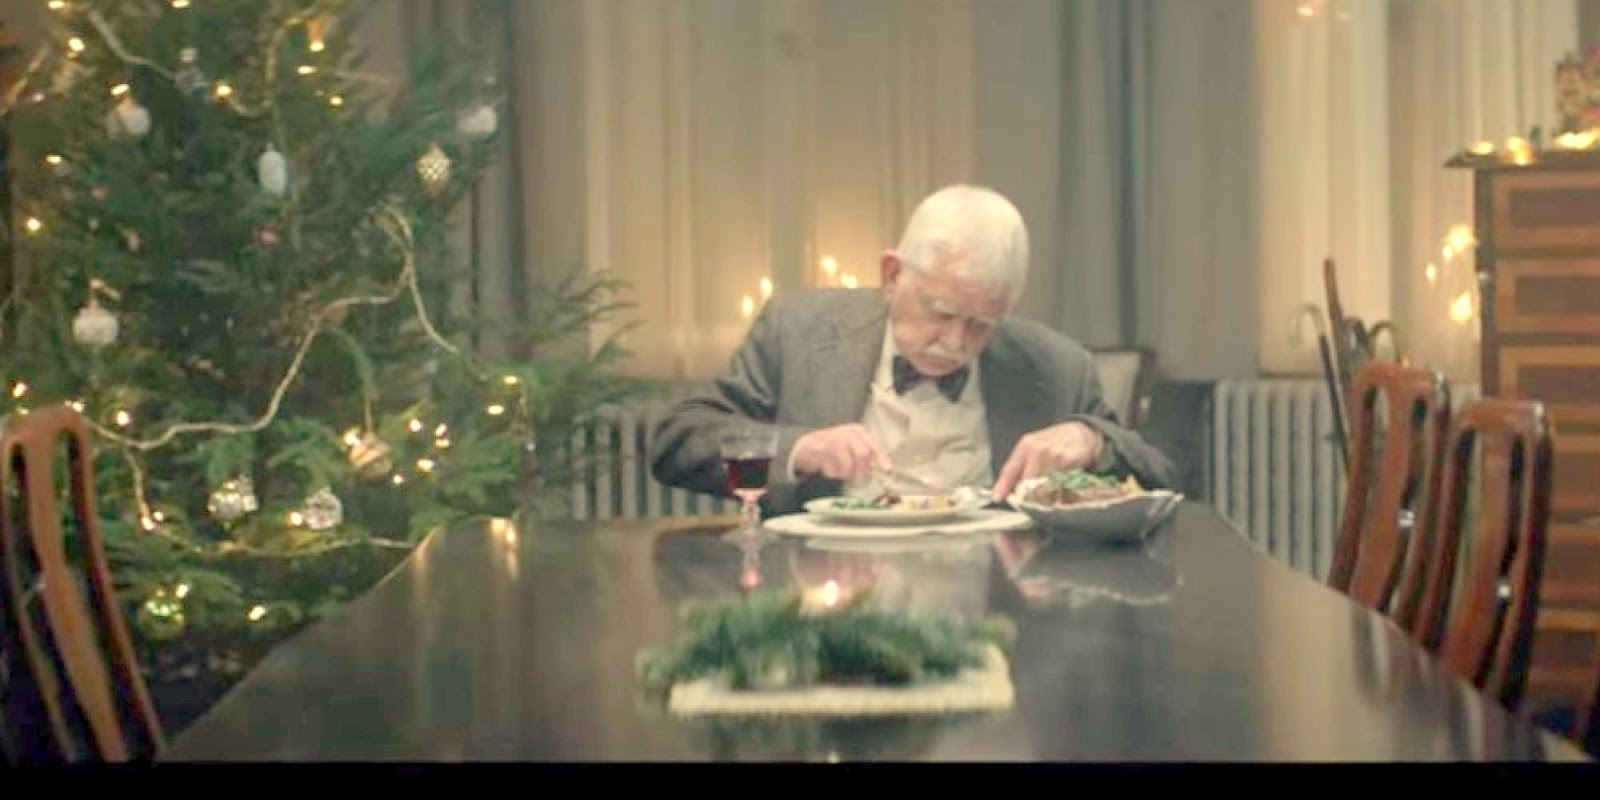 Catholic News World : Wow Powerful Christmas #Commercial shows why we need to visit Parents